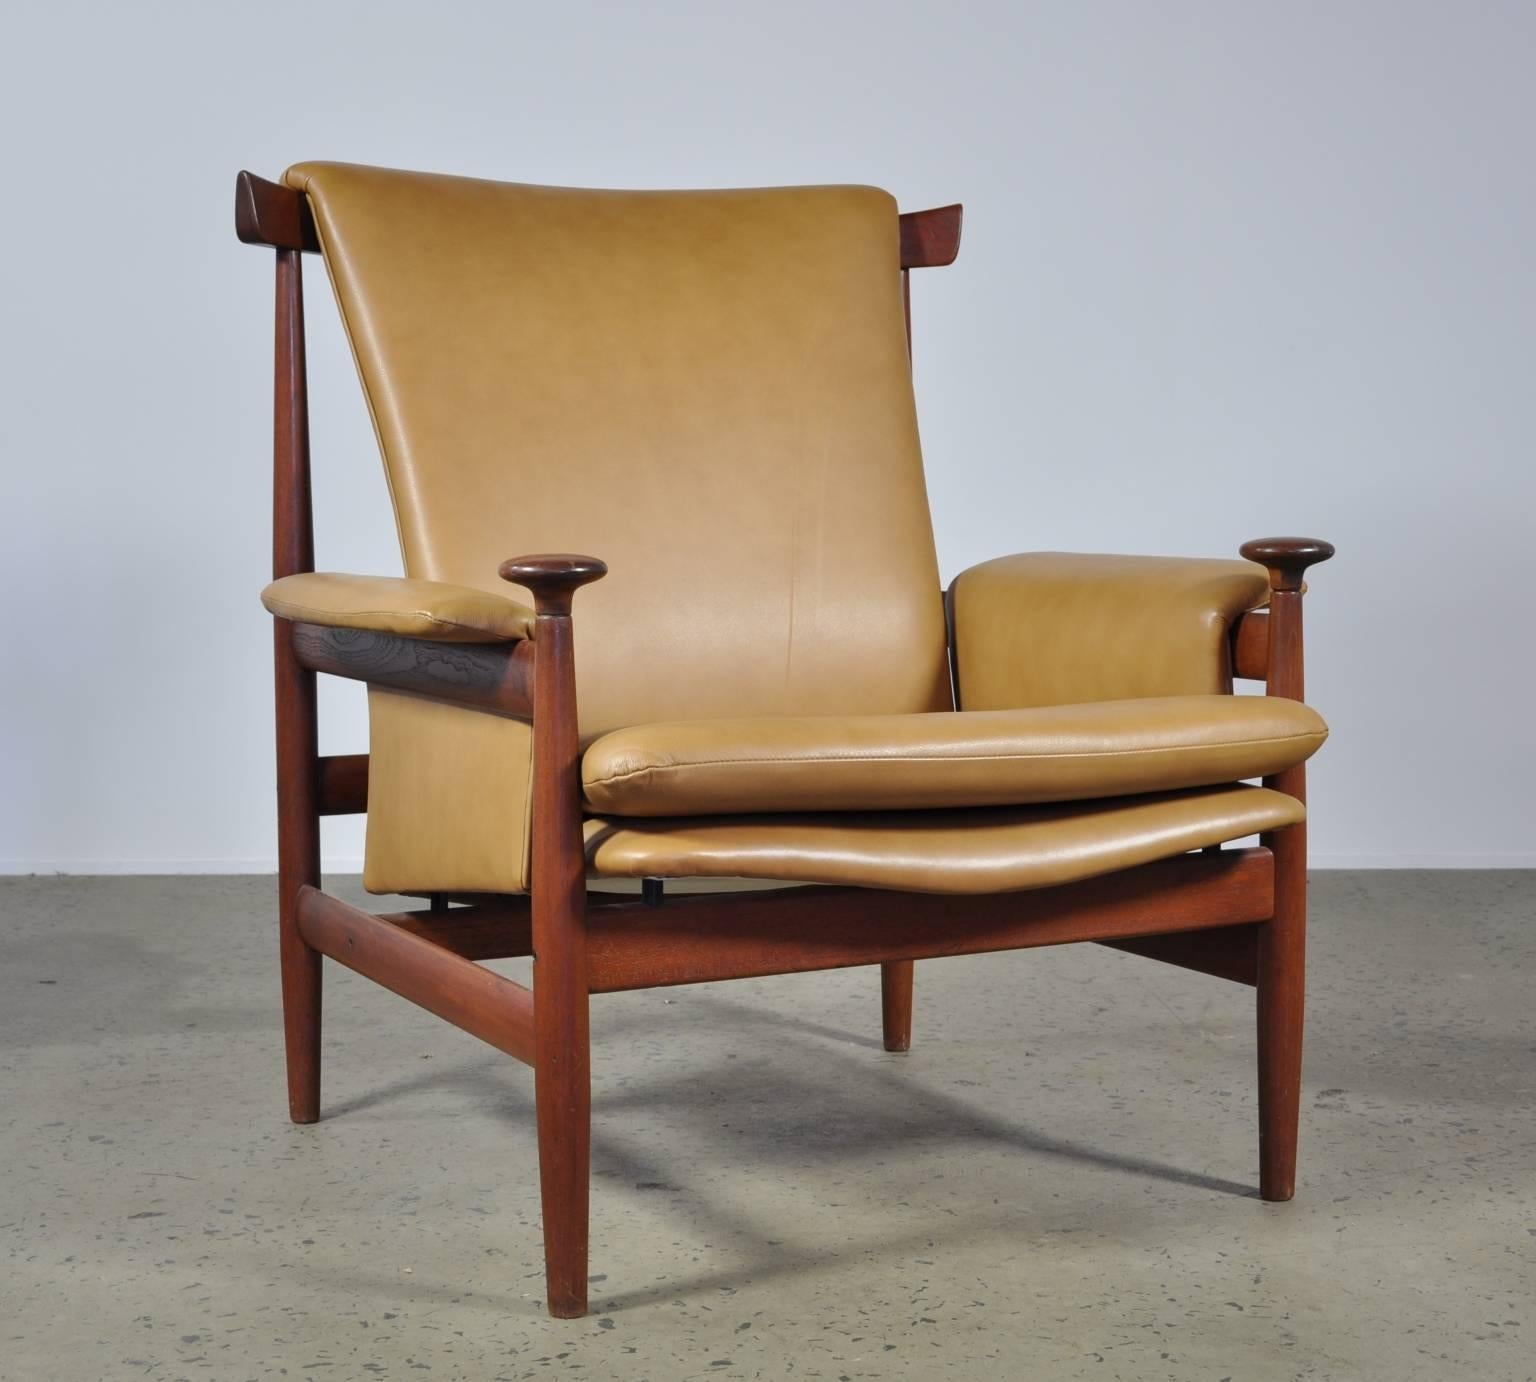 The iconic teak Bwana chair and ottoman by Finn Juhl for France & Sons in Denmark in 1962.

A combination of African influence and Scandinavian design, this chair makes a subtle statement in any situation. This rare Jon Stuart edition was